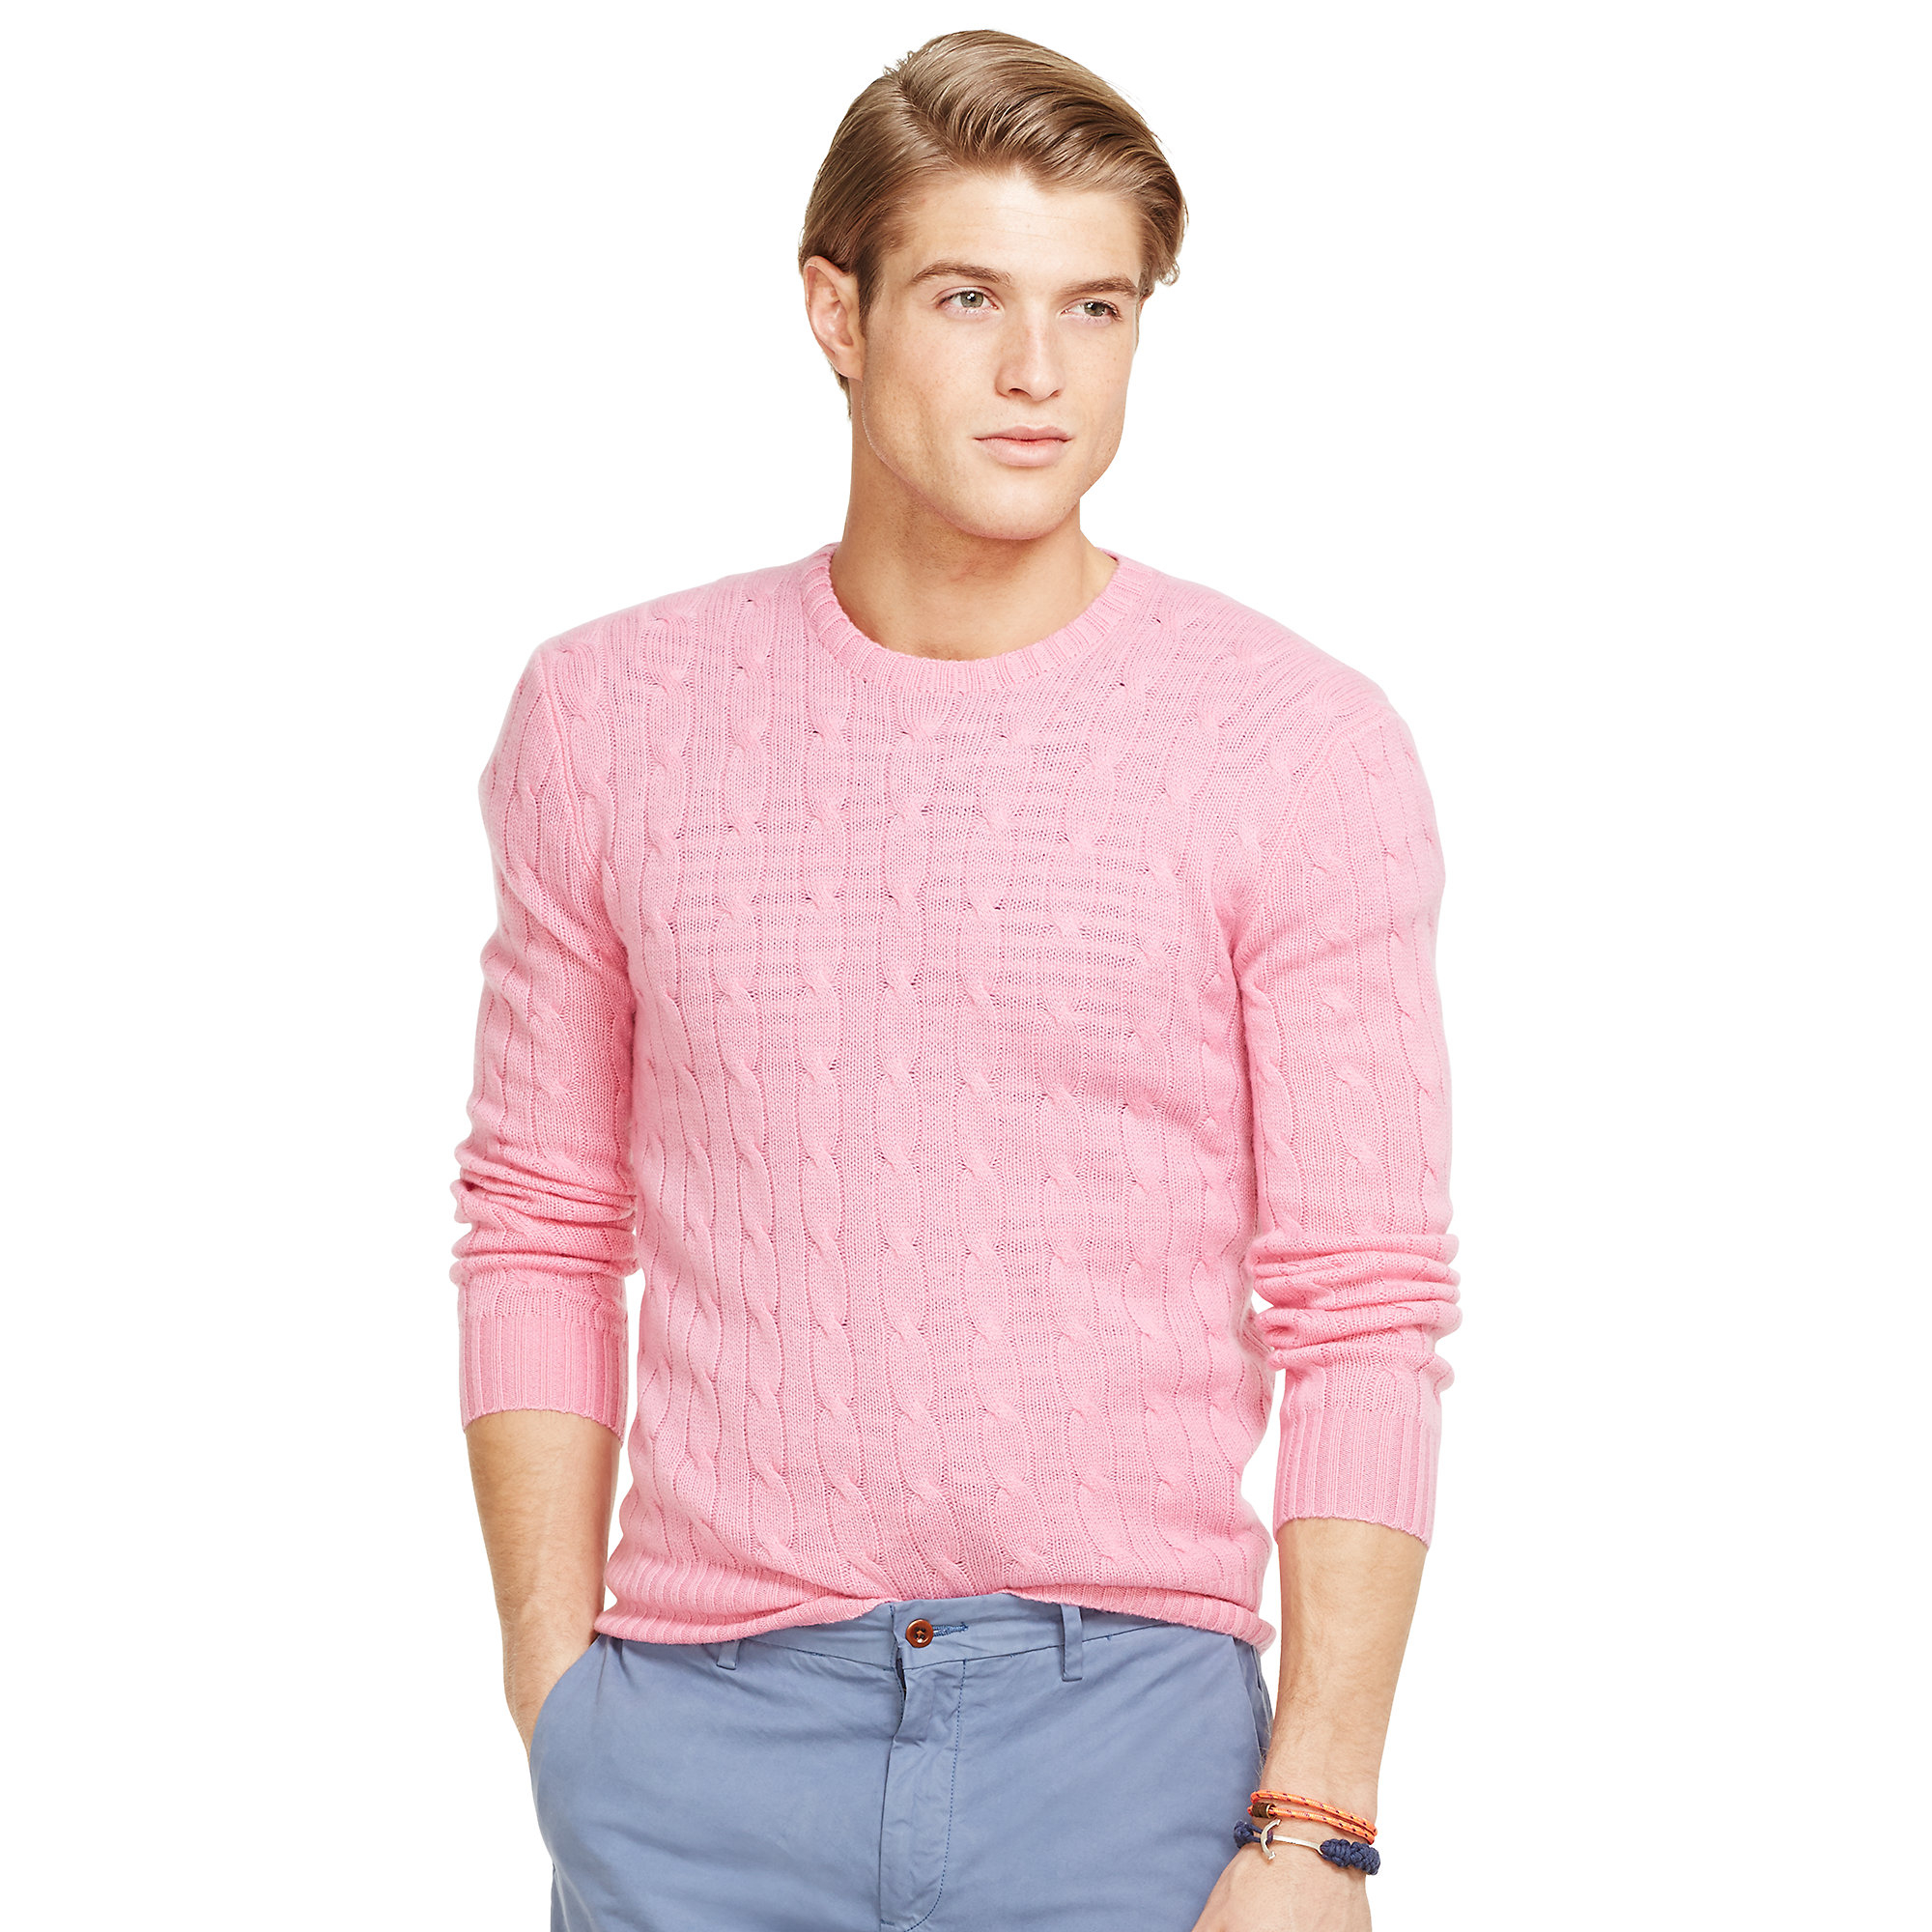 Lyst - Polo Ralph Lauren Cable-Knit Cashmere Sweater in Pink for Men